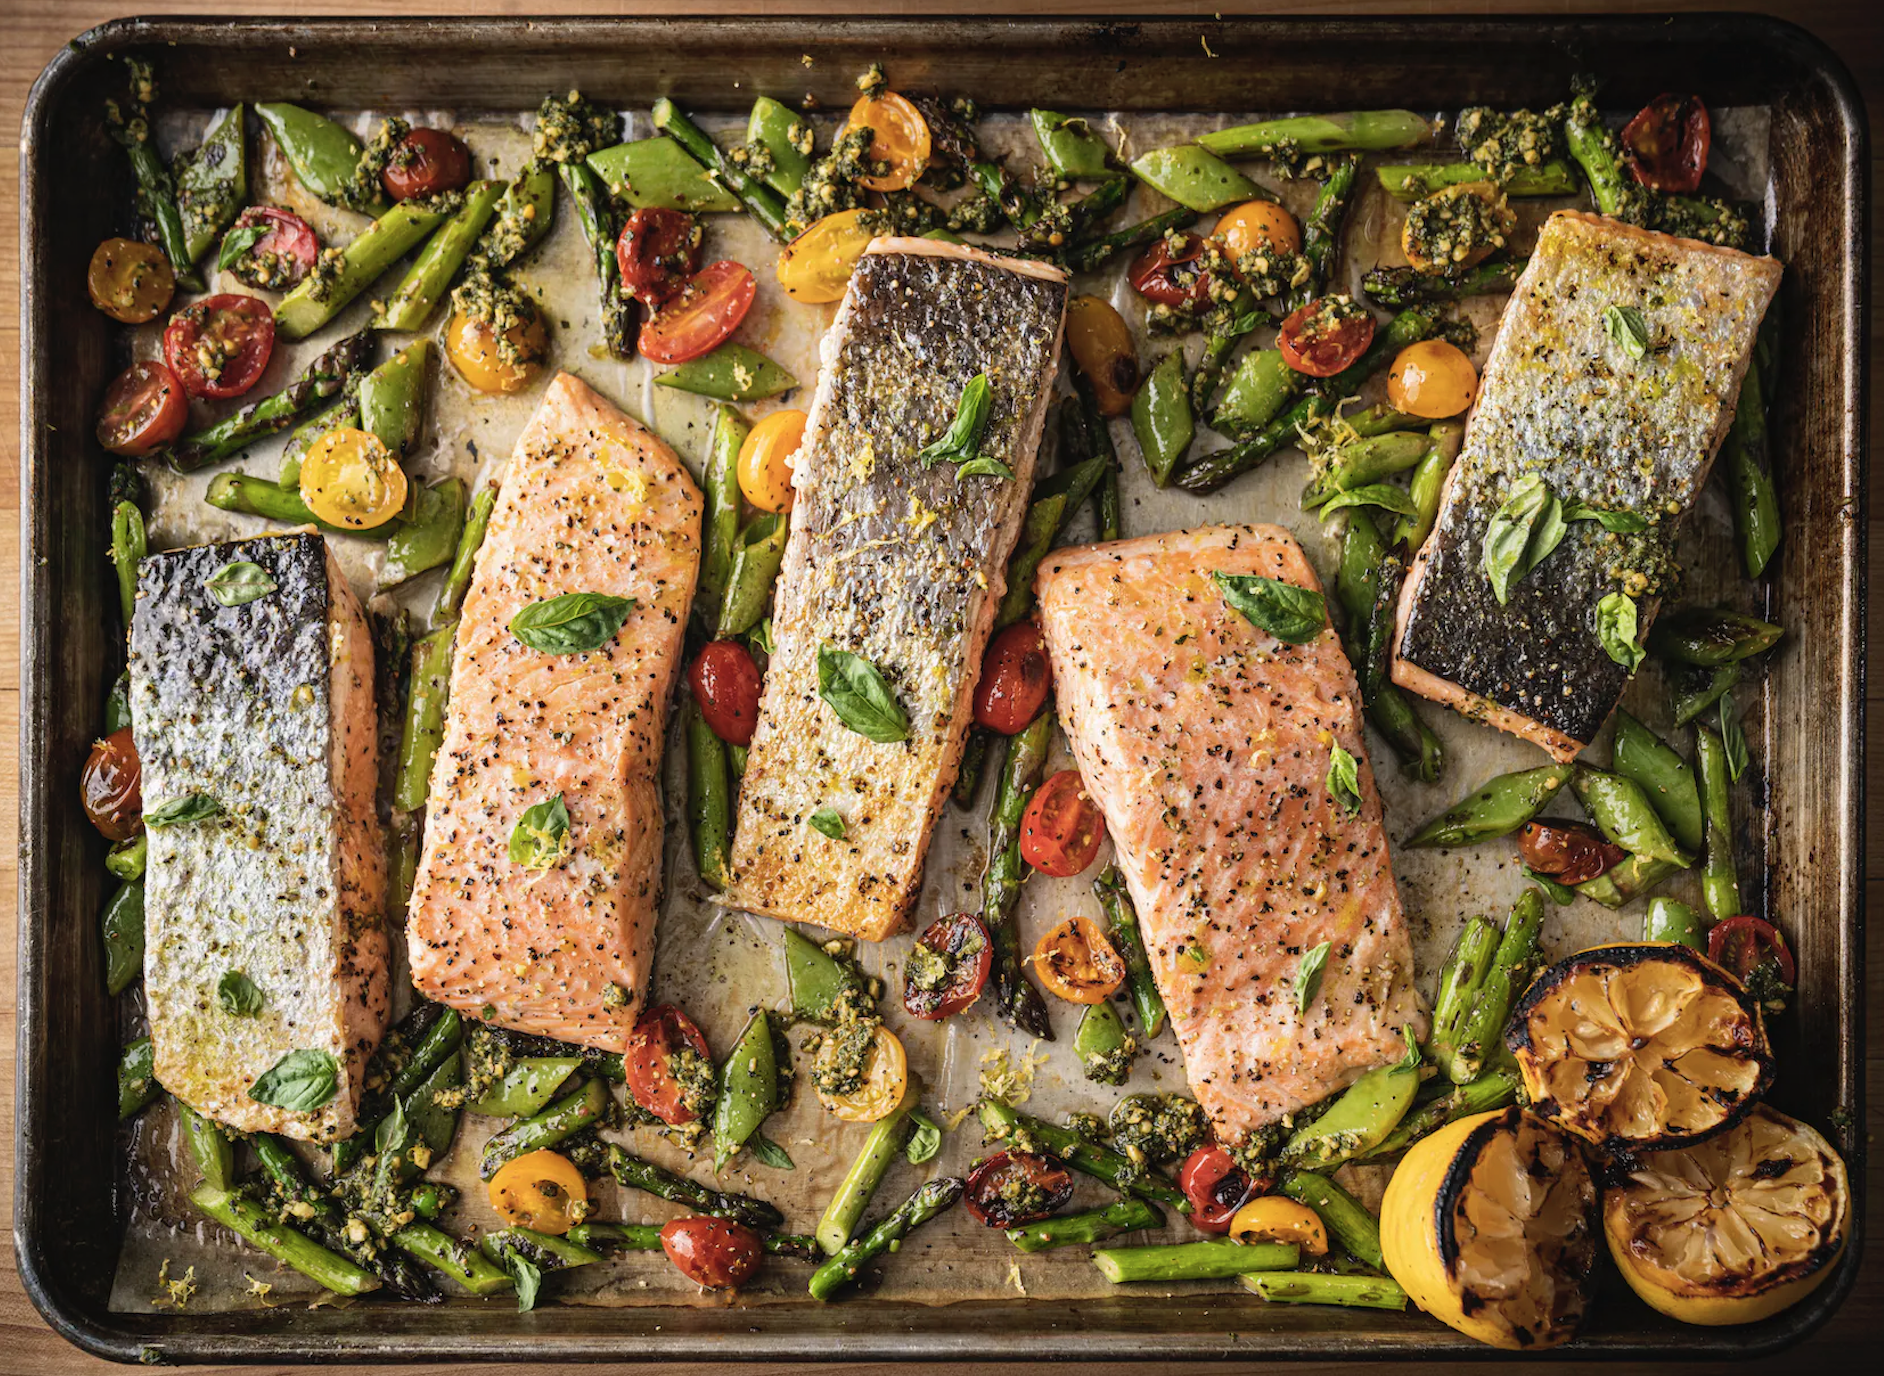 A Traeger Special: Roasted Sheet Pan Salmon with Vegetables and Pesto